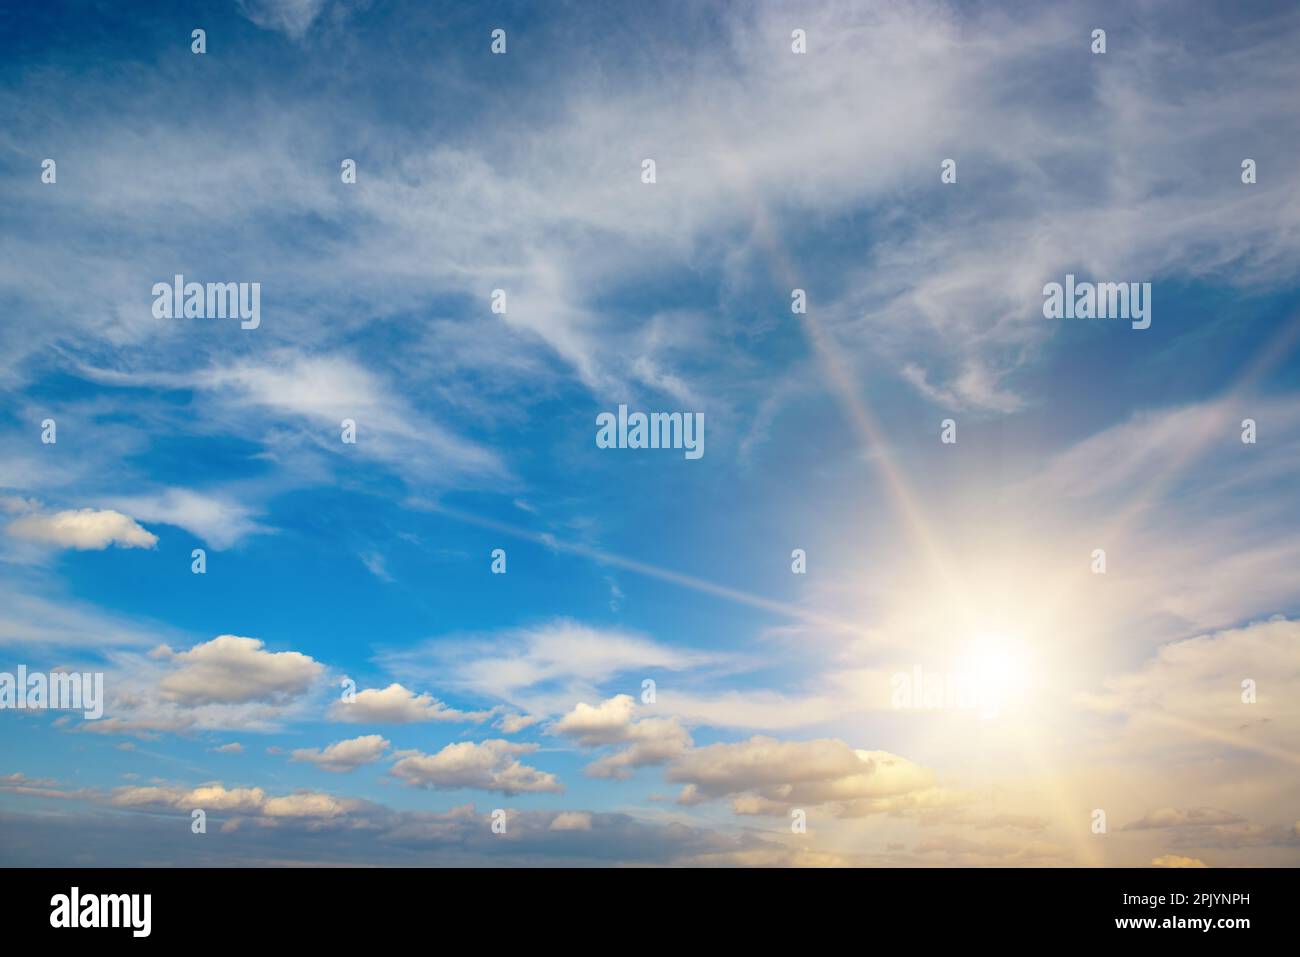 Bright sun on beautiful blue sky with white fluffy clouds. Stock Photo